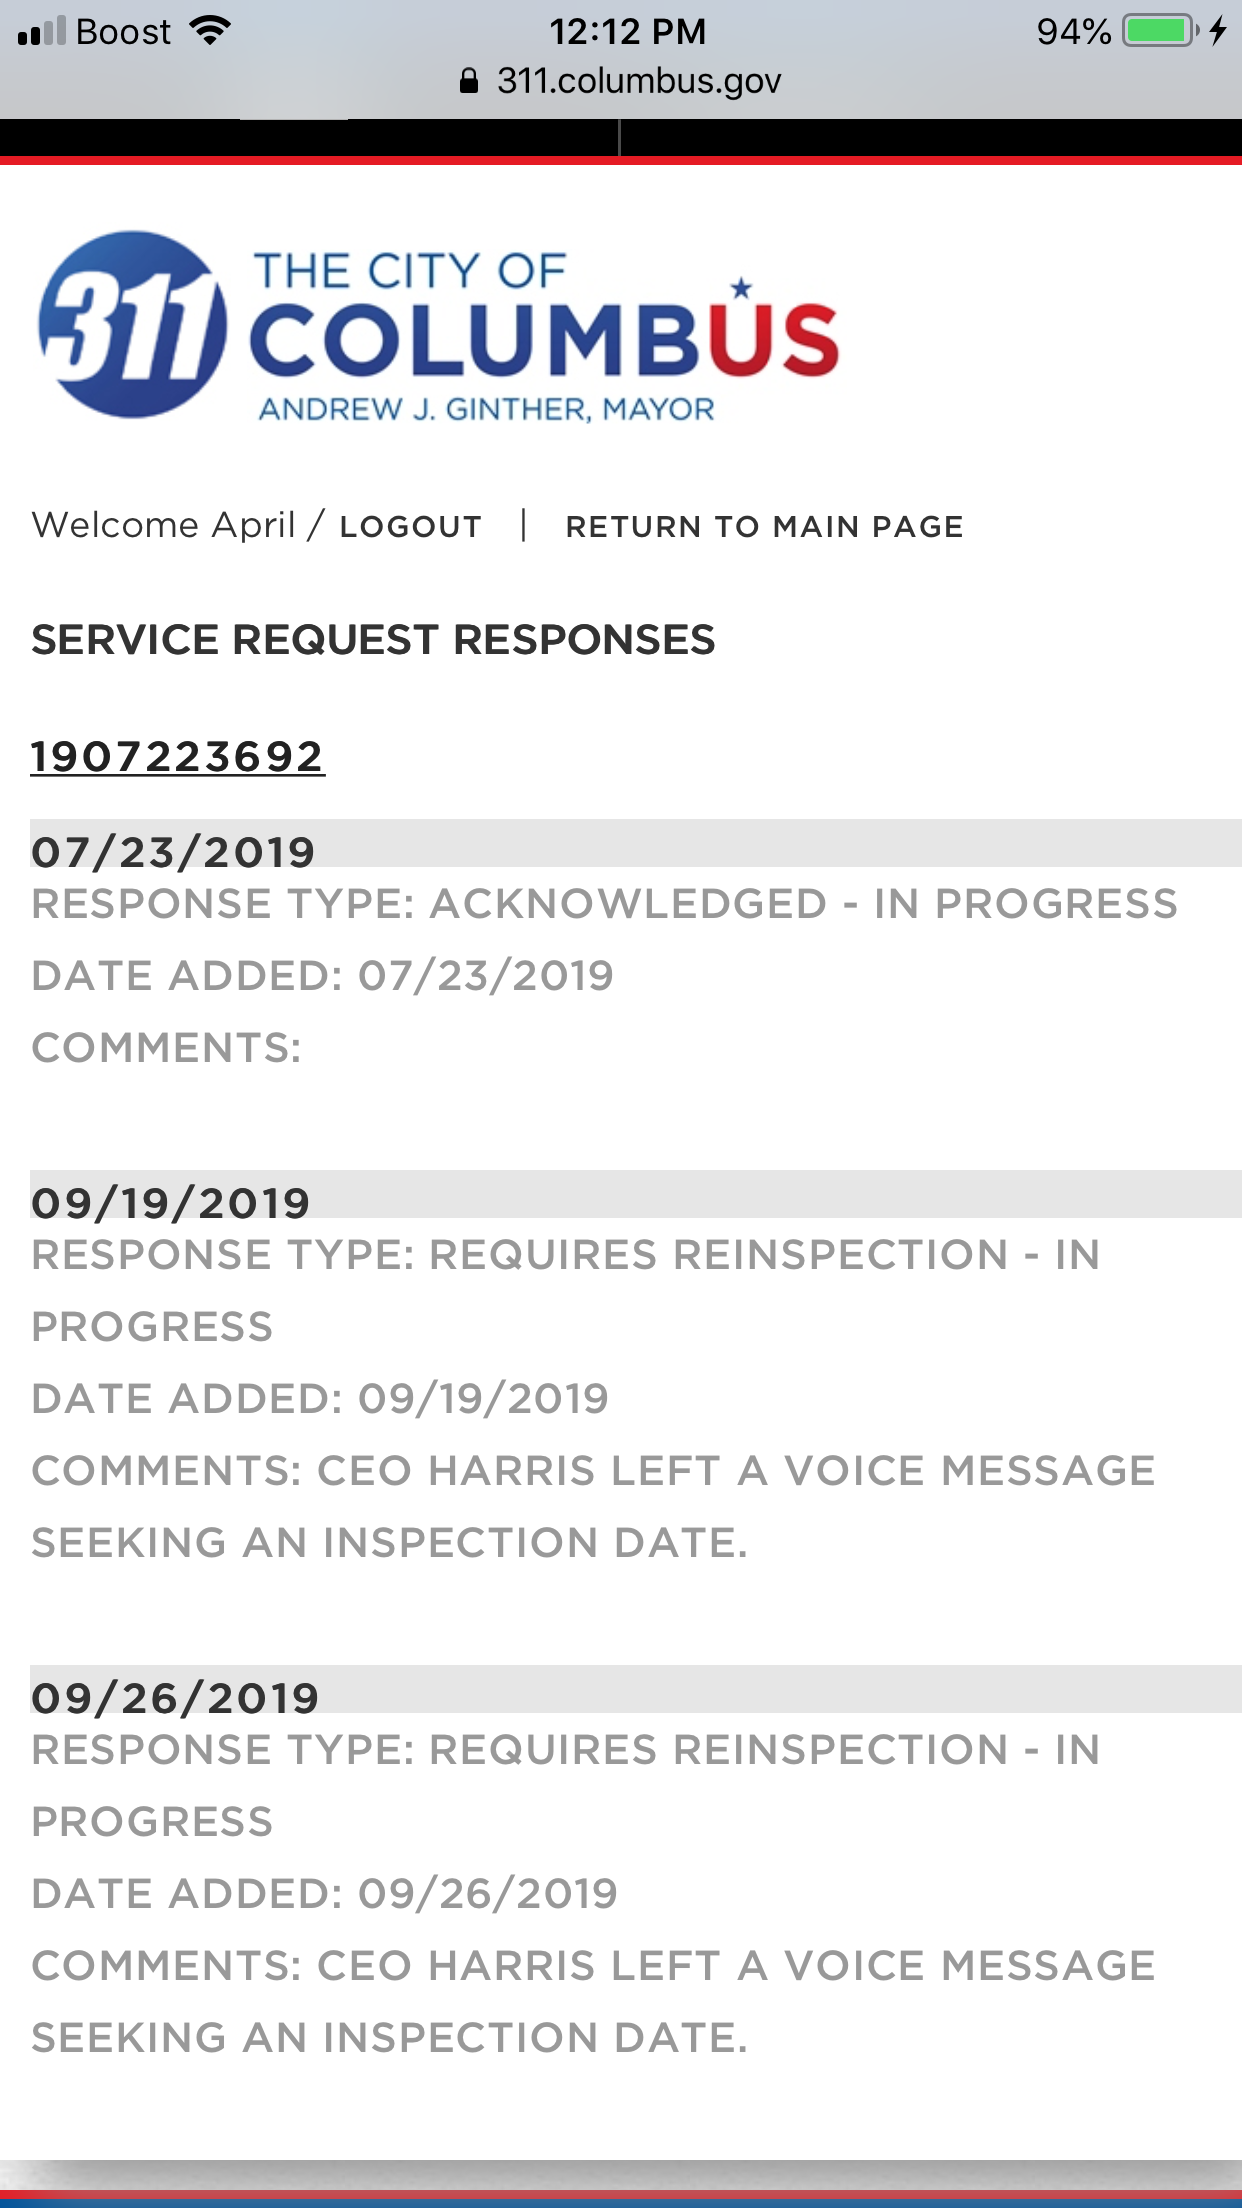 Reported back in July 2019 no action taken